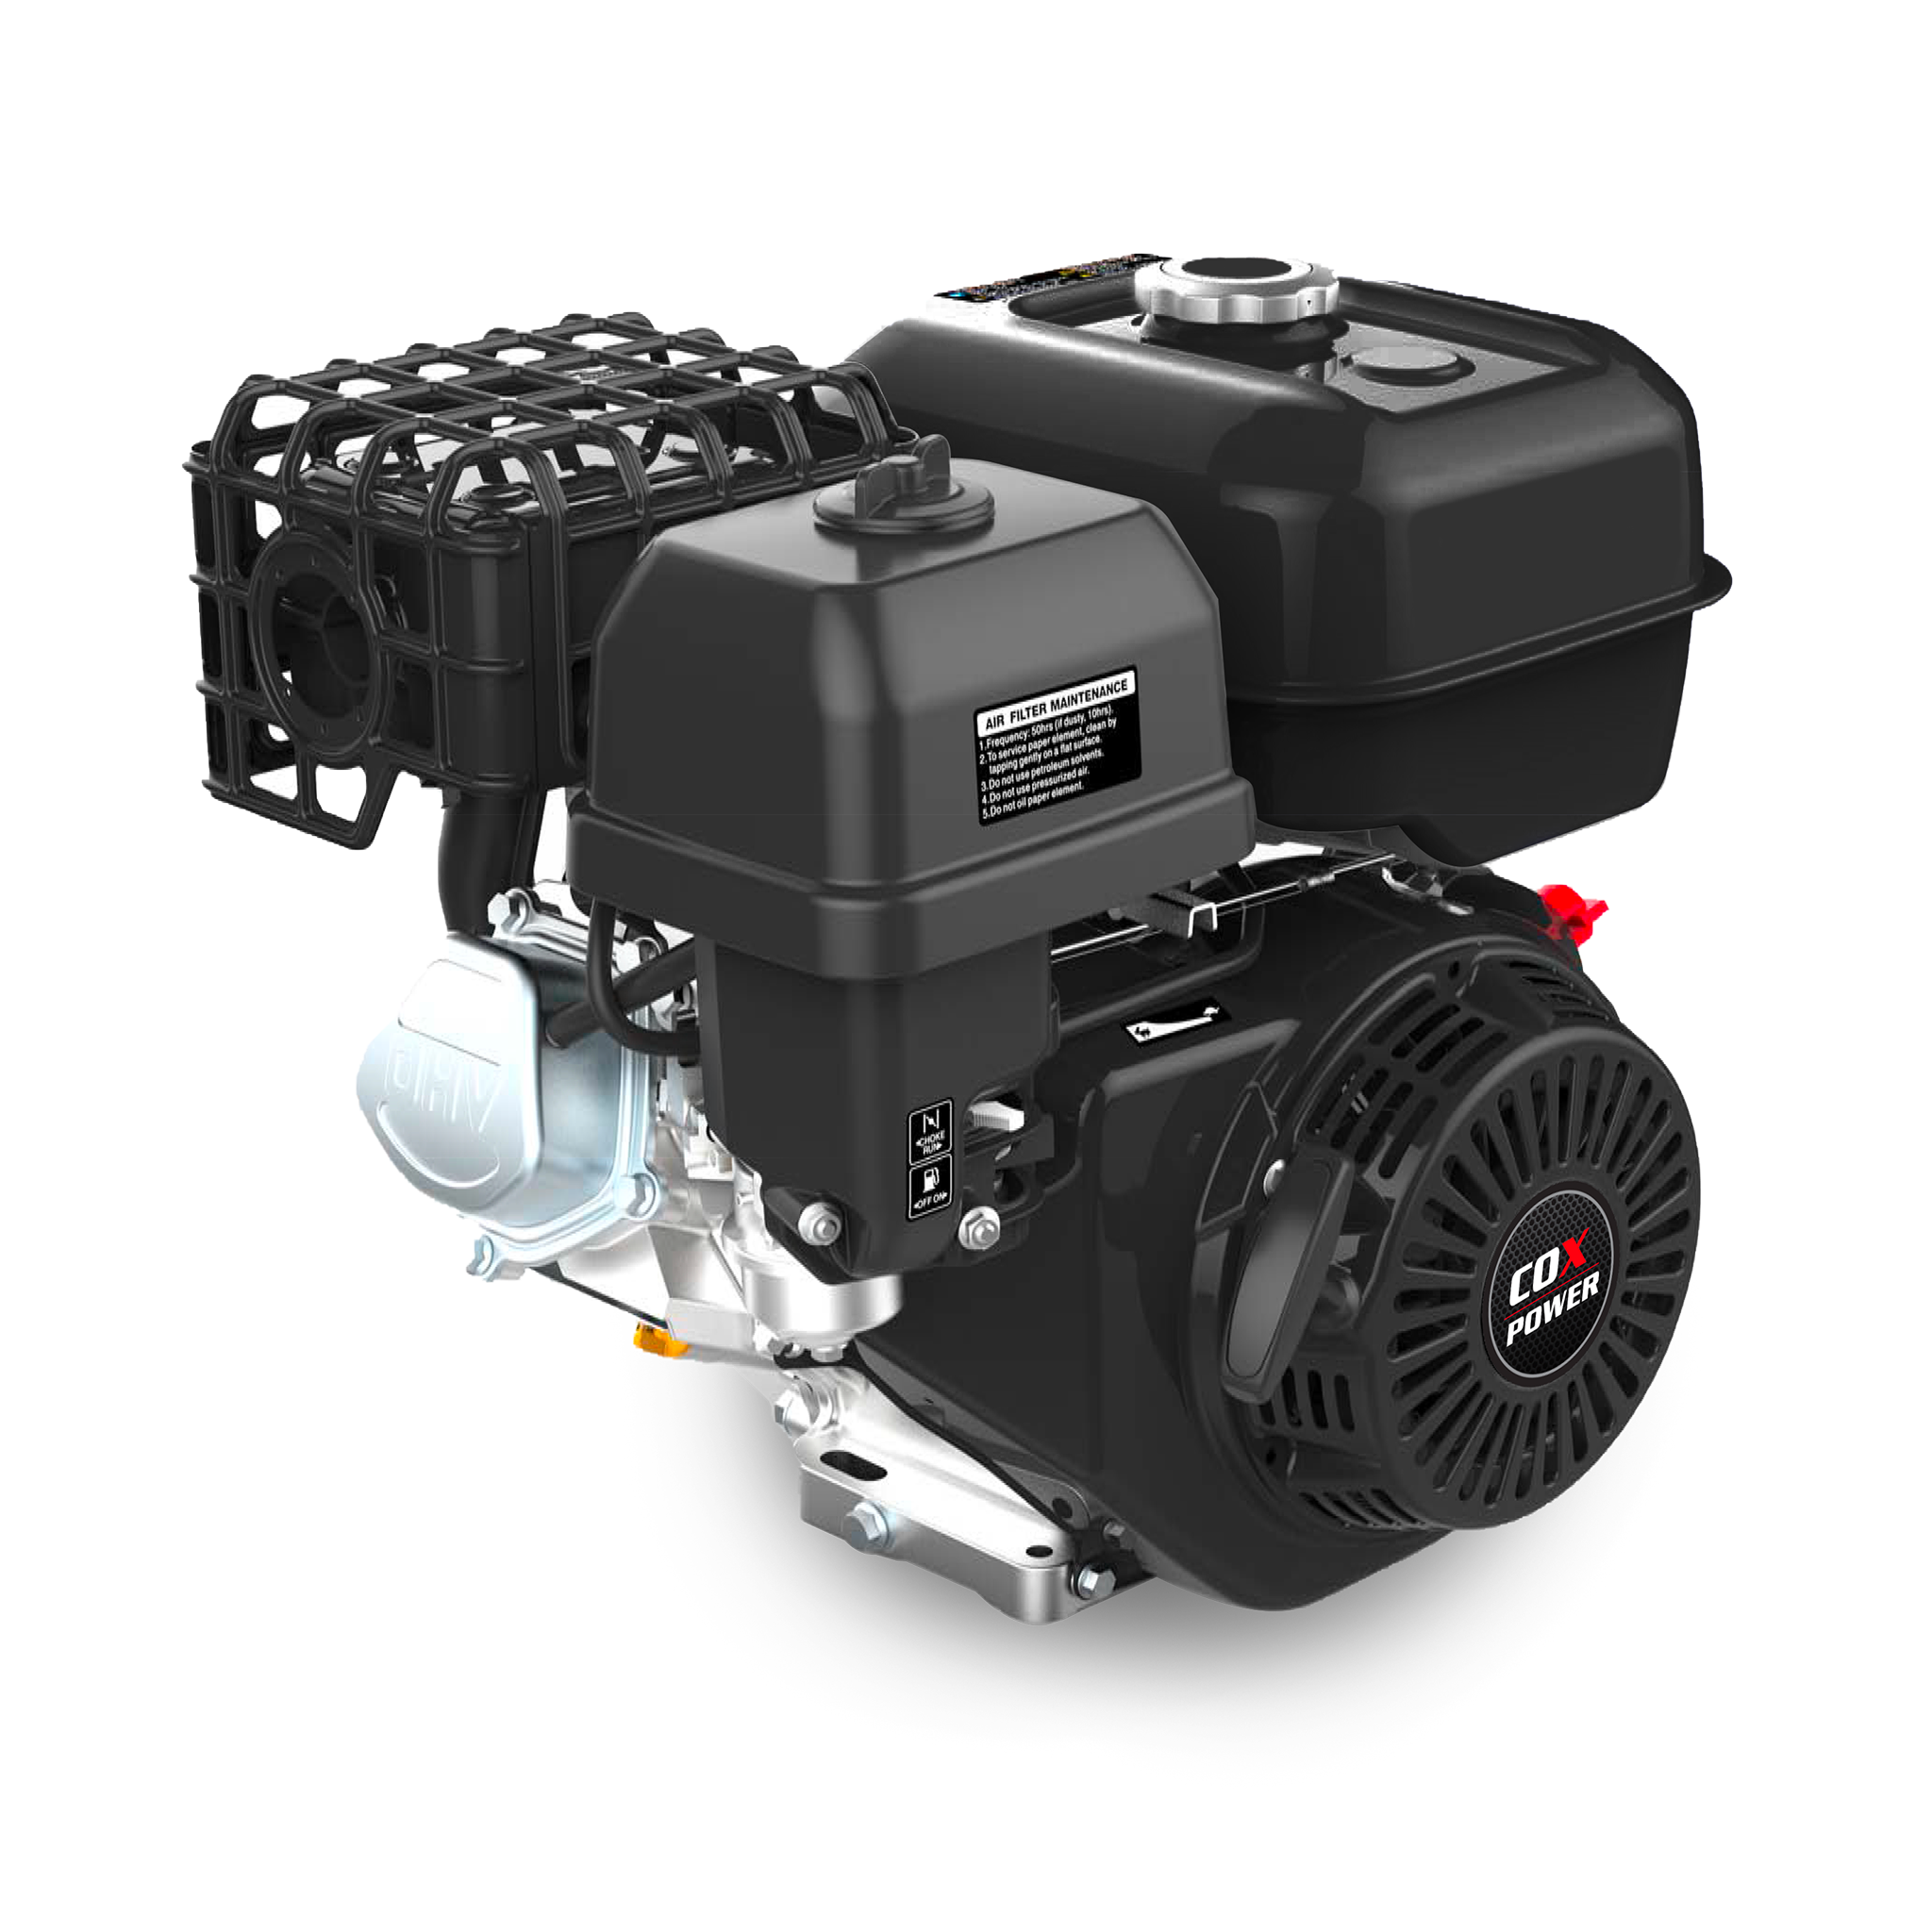 COX Power product image of a 11hp Keyway Shaft Horizontal Engine with an electric start